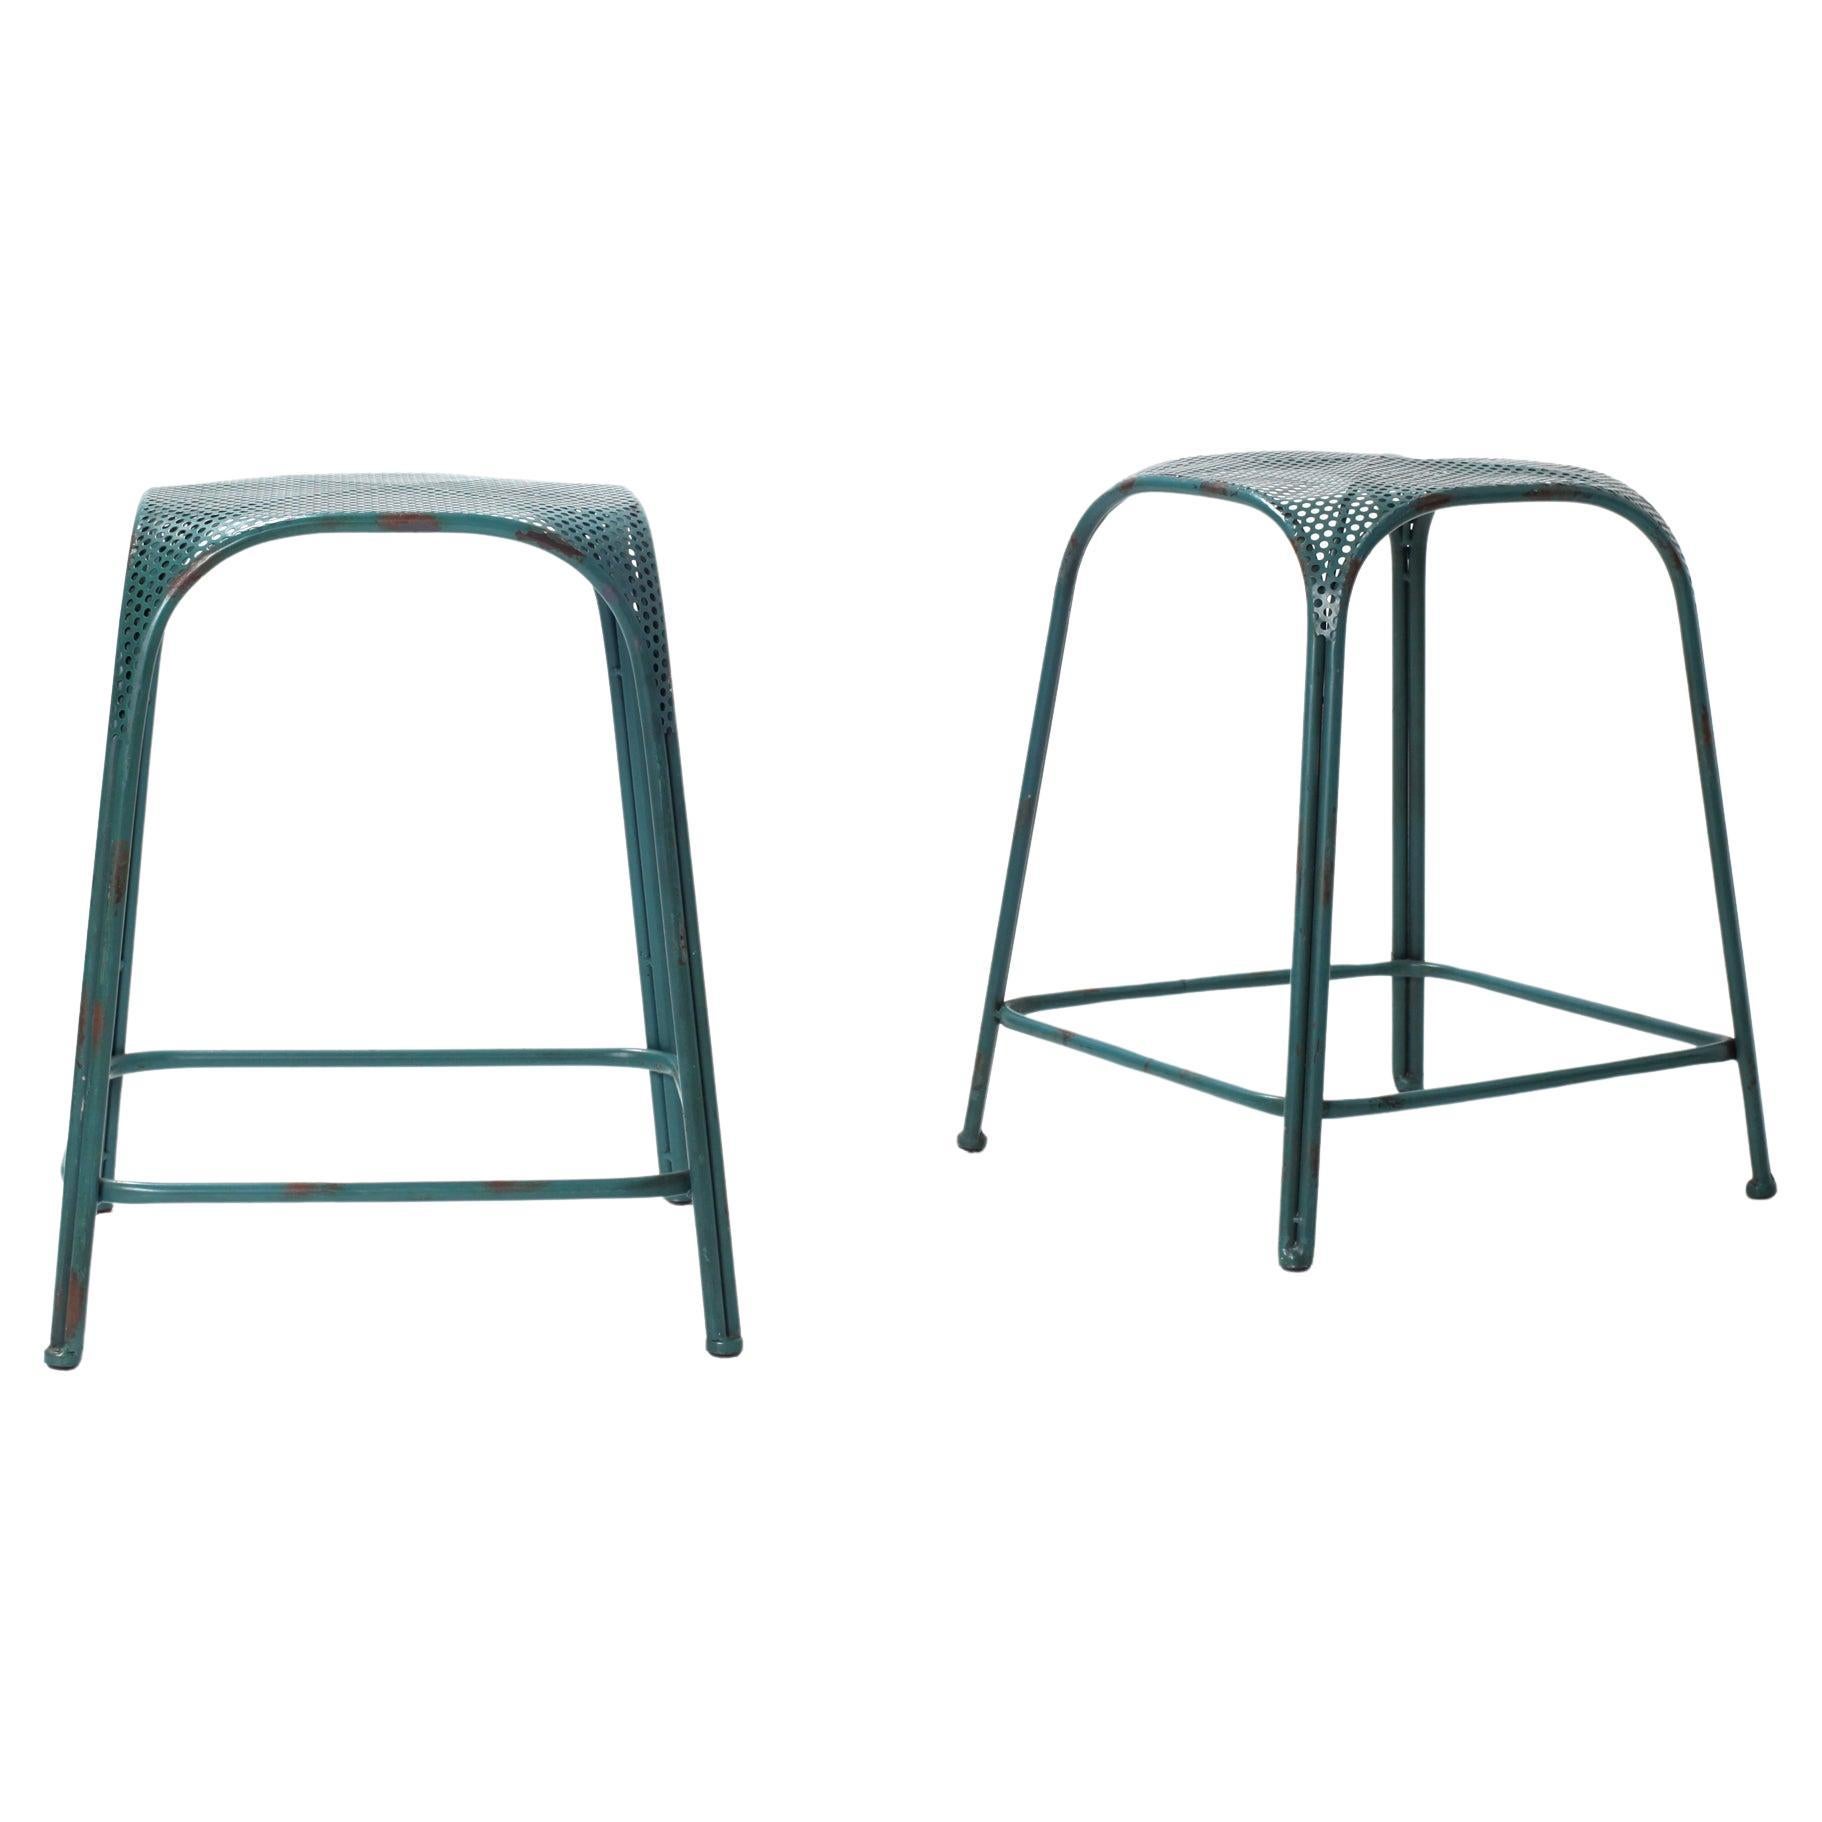 Pair of Perforated Steel Seat Italian Stool In the Style of Mategot 1960s